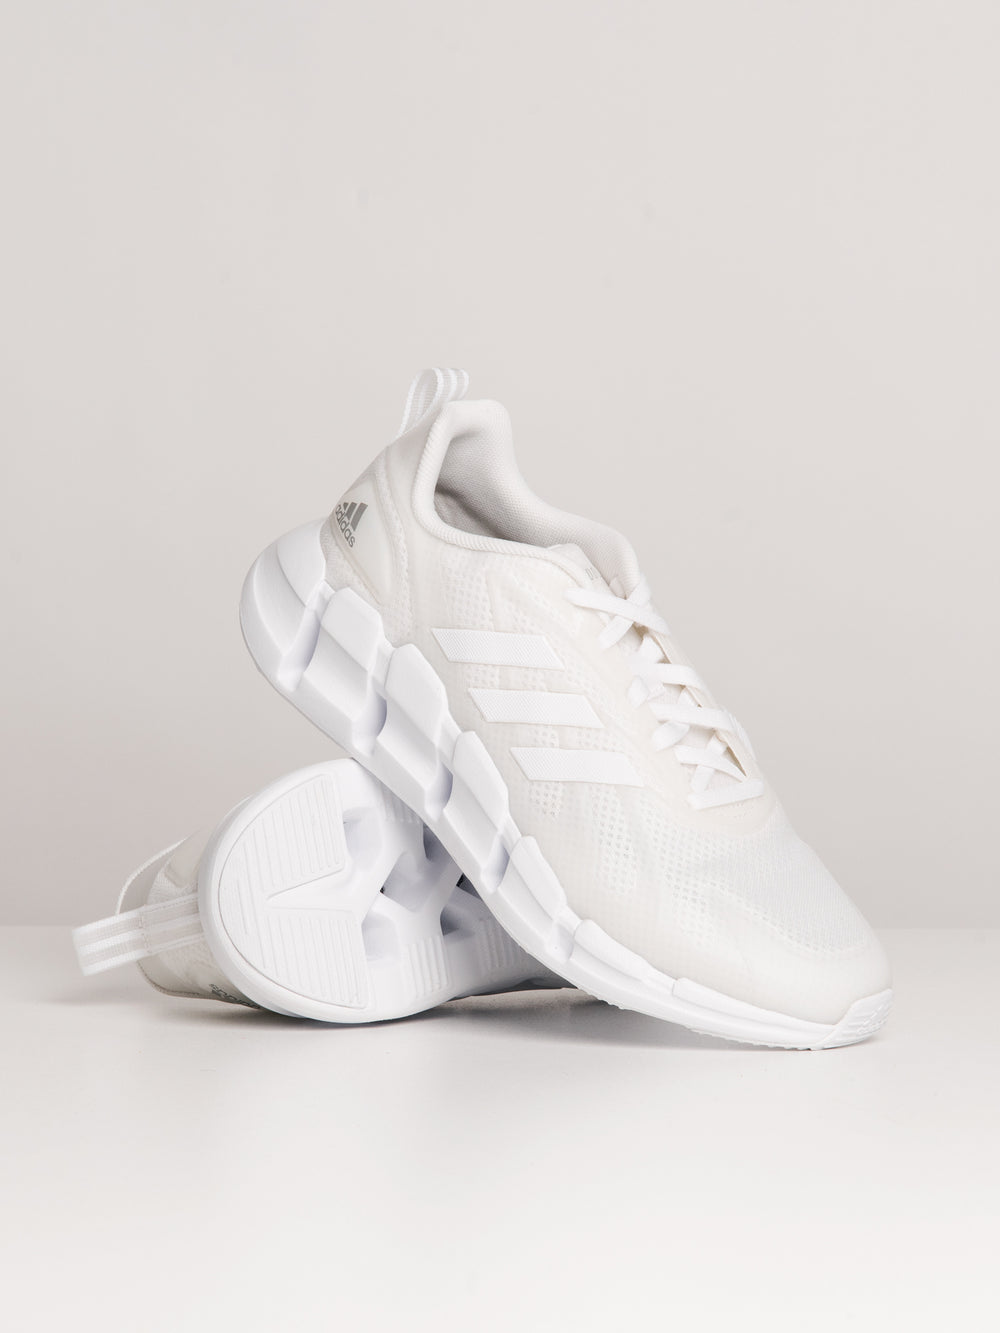 MENS ADIDAS VENTICE SNEAKERS - CLEARANCE